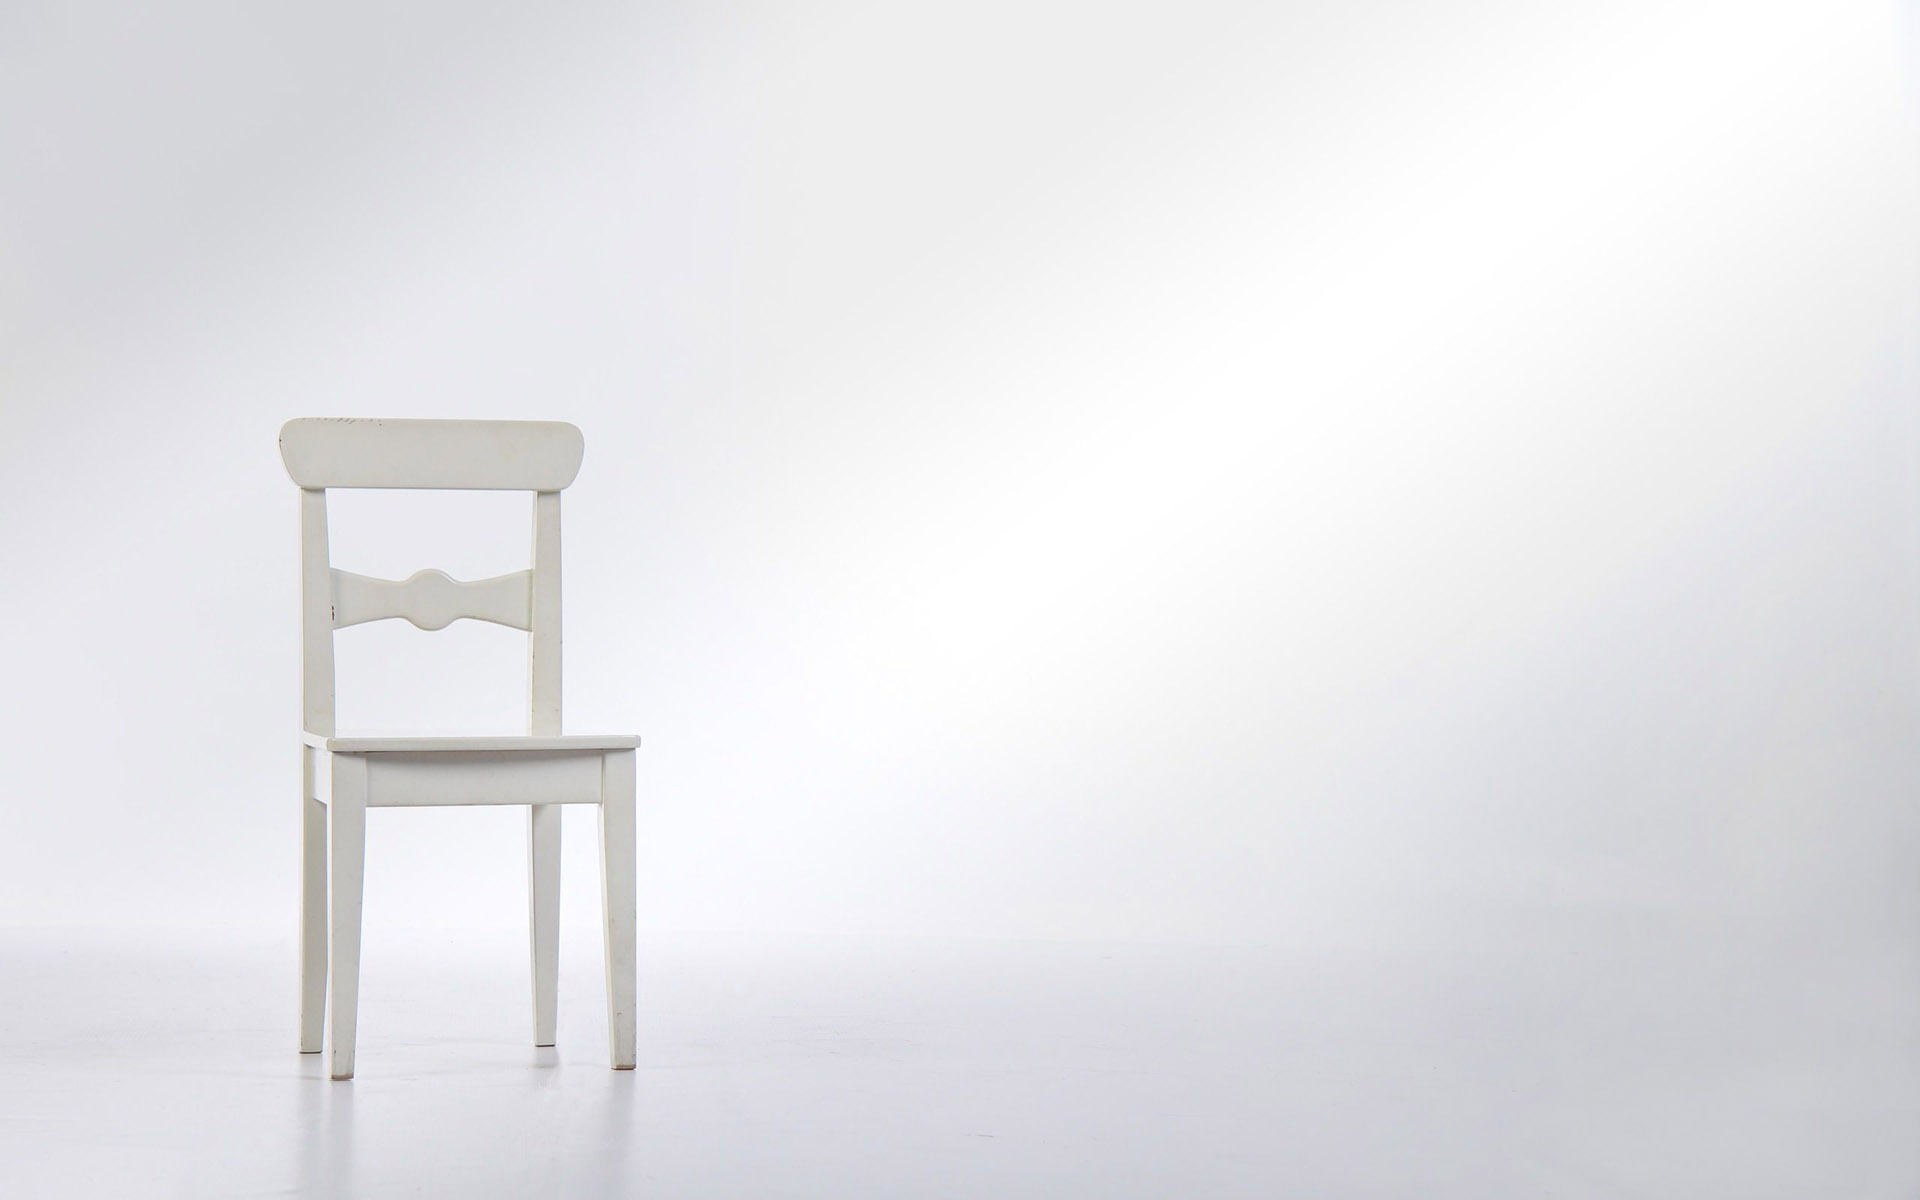 13 Fantastic Hd Chair Wallpapers - Chair In White Room - HD Wallpaper 